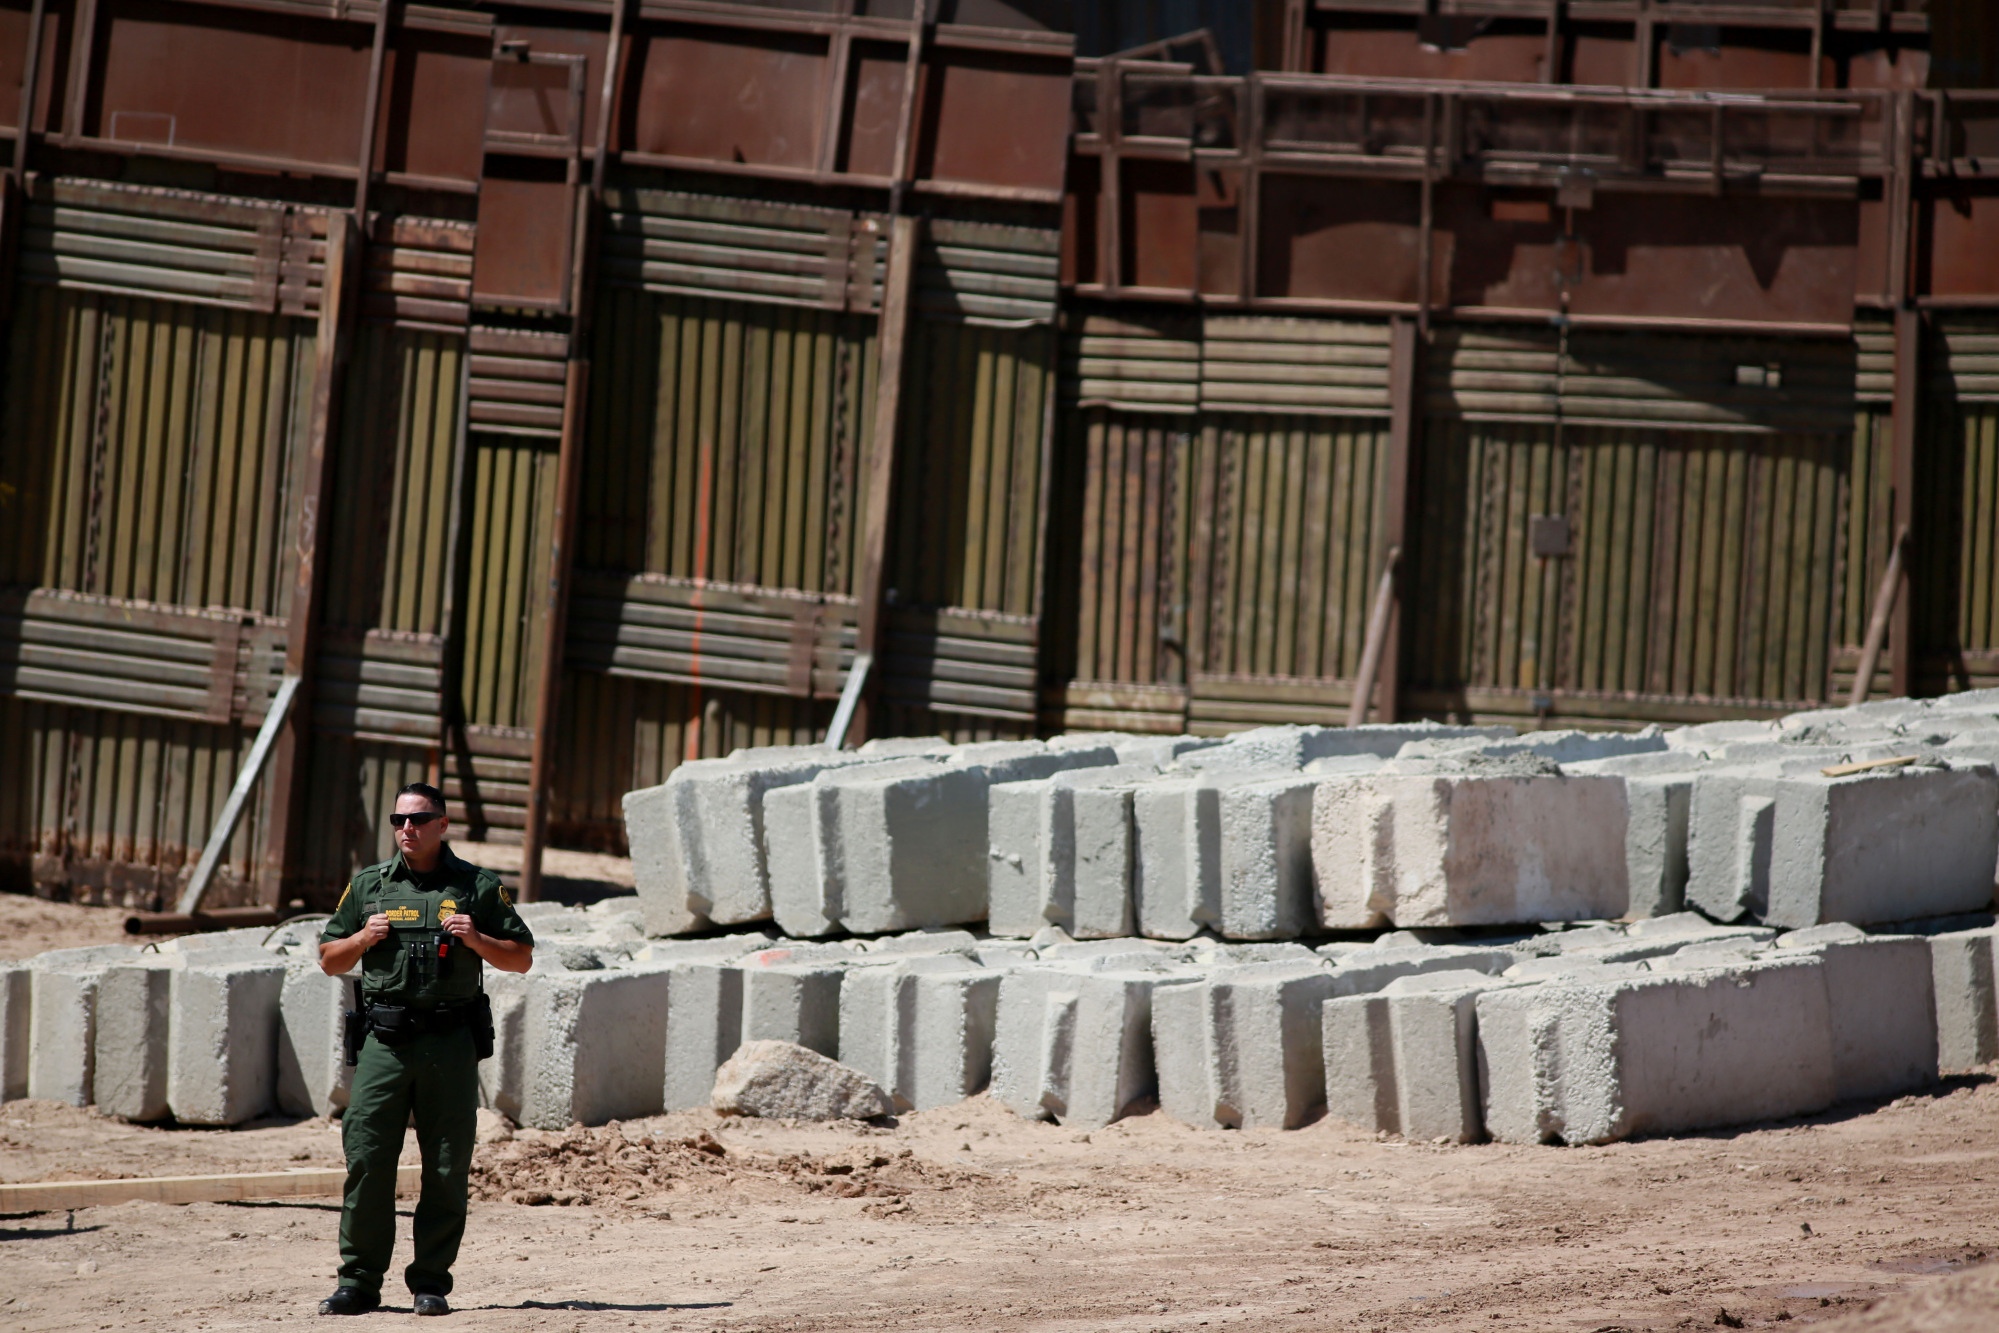 A U.S. Border Patrol agent stands guard in front of border wall construction in Calexico, California, on Wednesday, April 18, 2018.&nbsp;